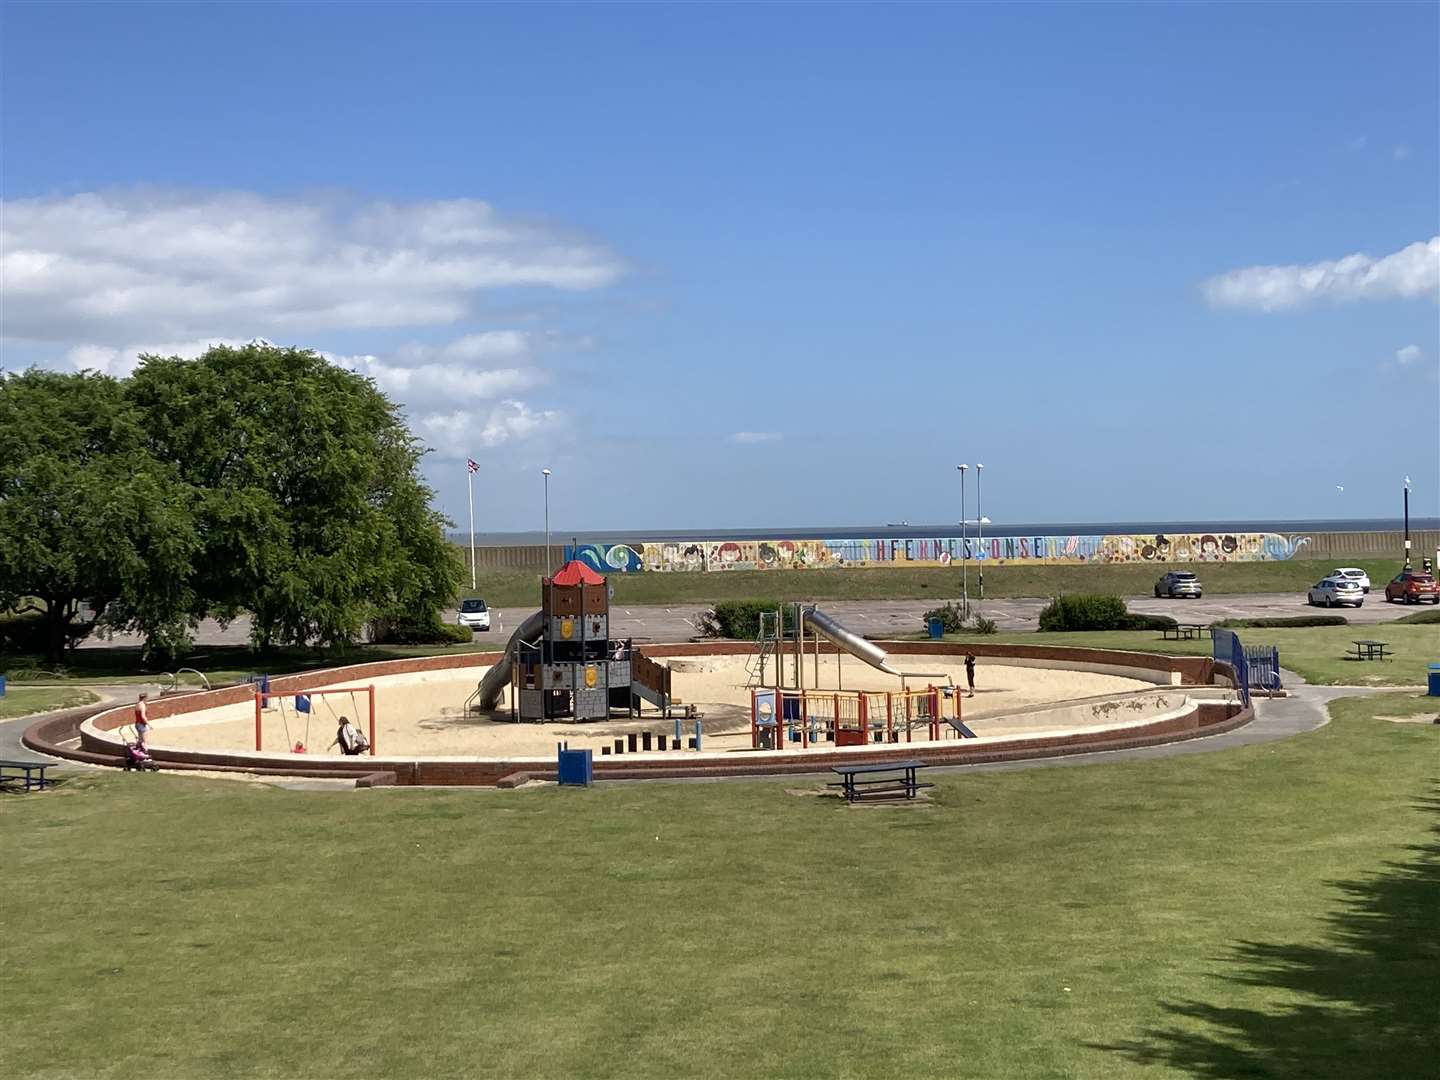 The sandpit children's play area at Beachfields on the seafront in Sheerness